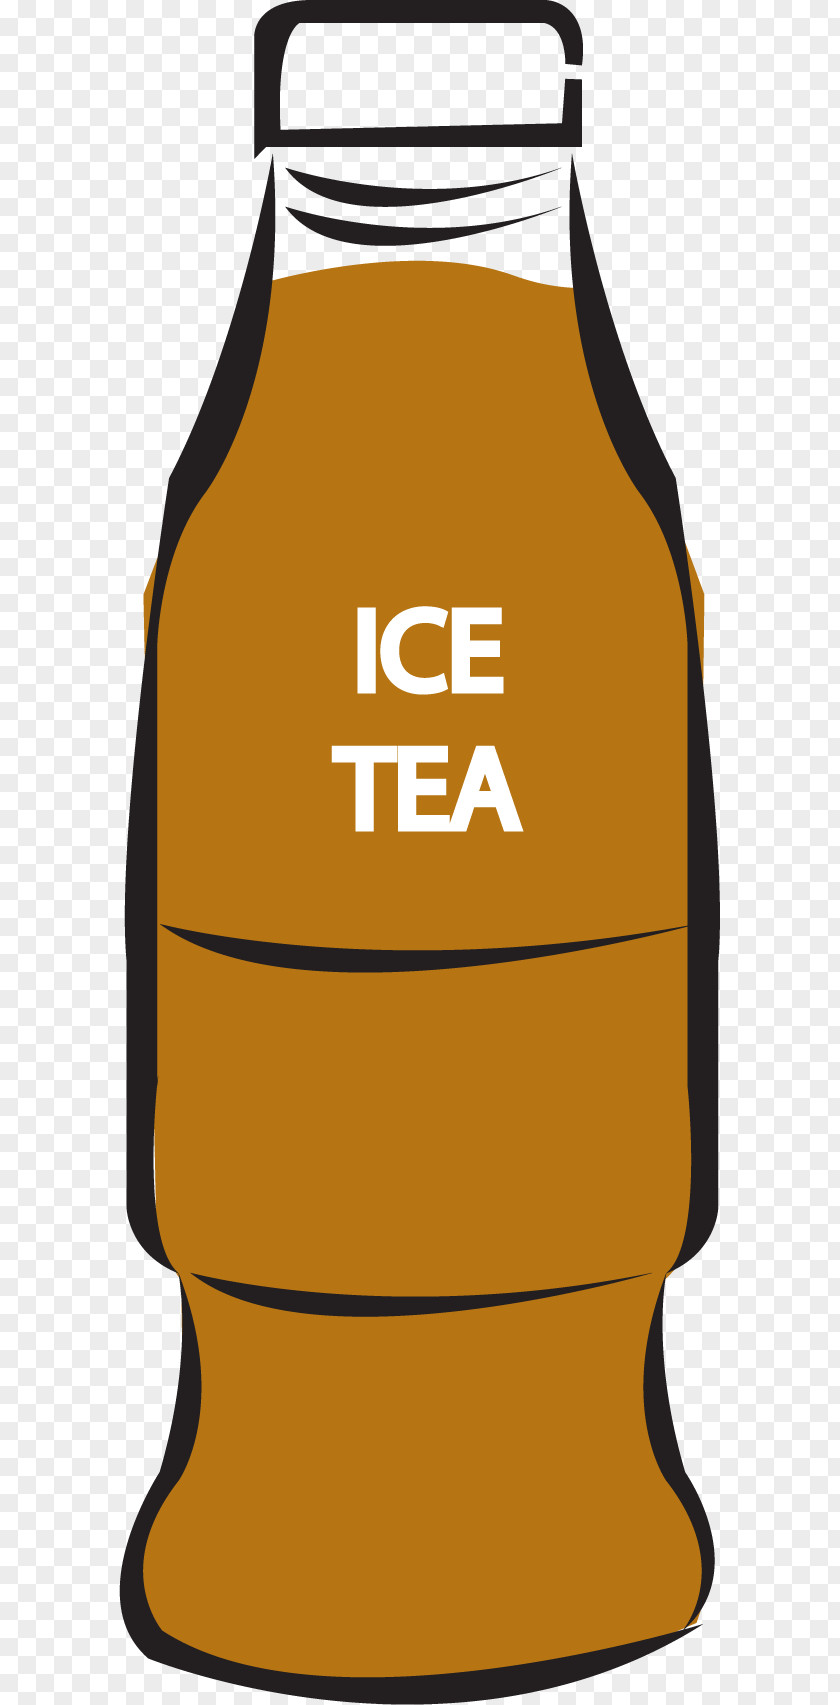 Sugary Beverages Clip Art Product Design Iced Tea PNG